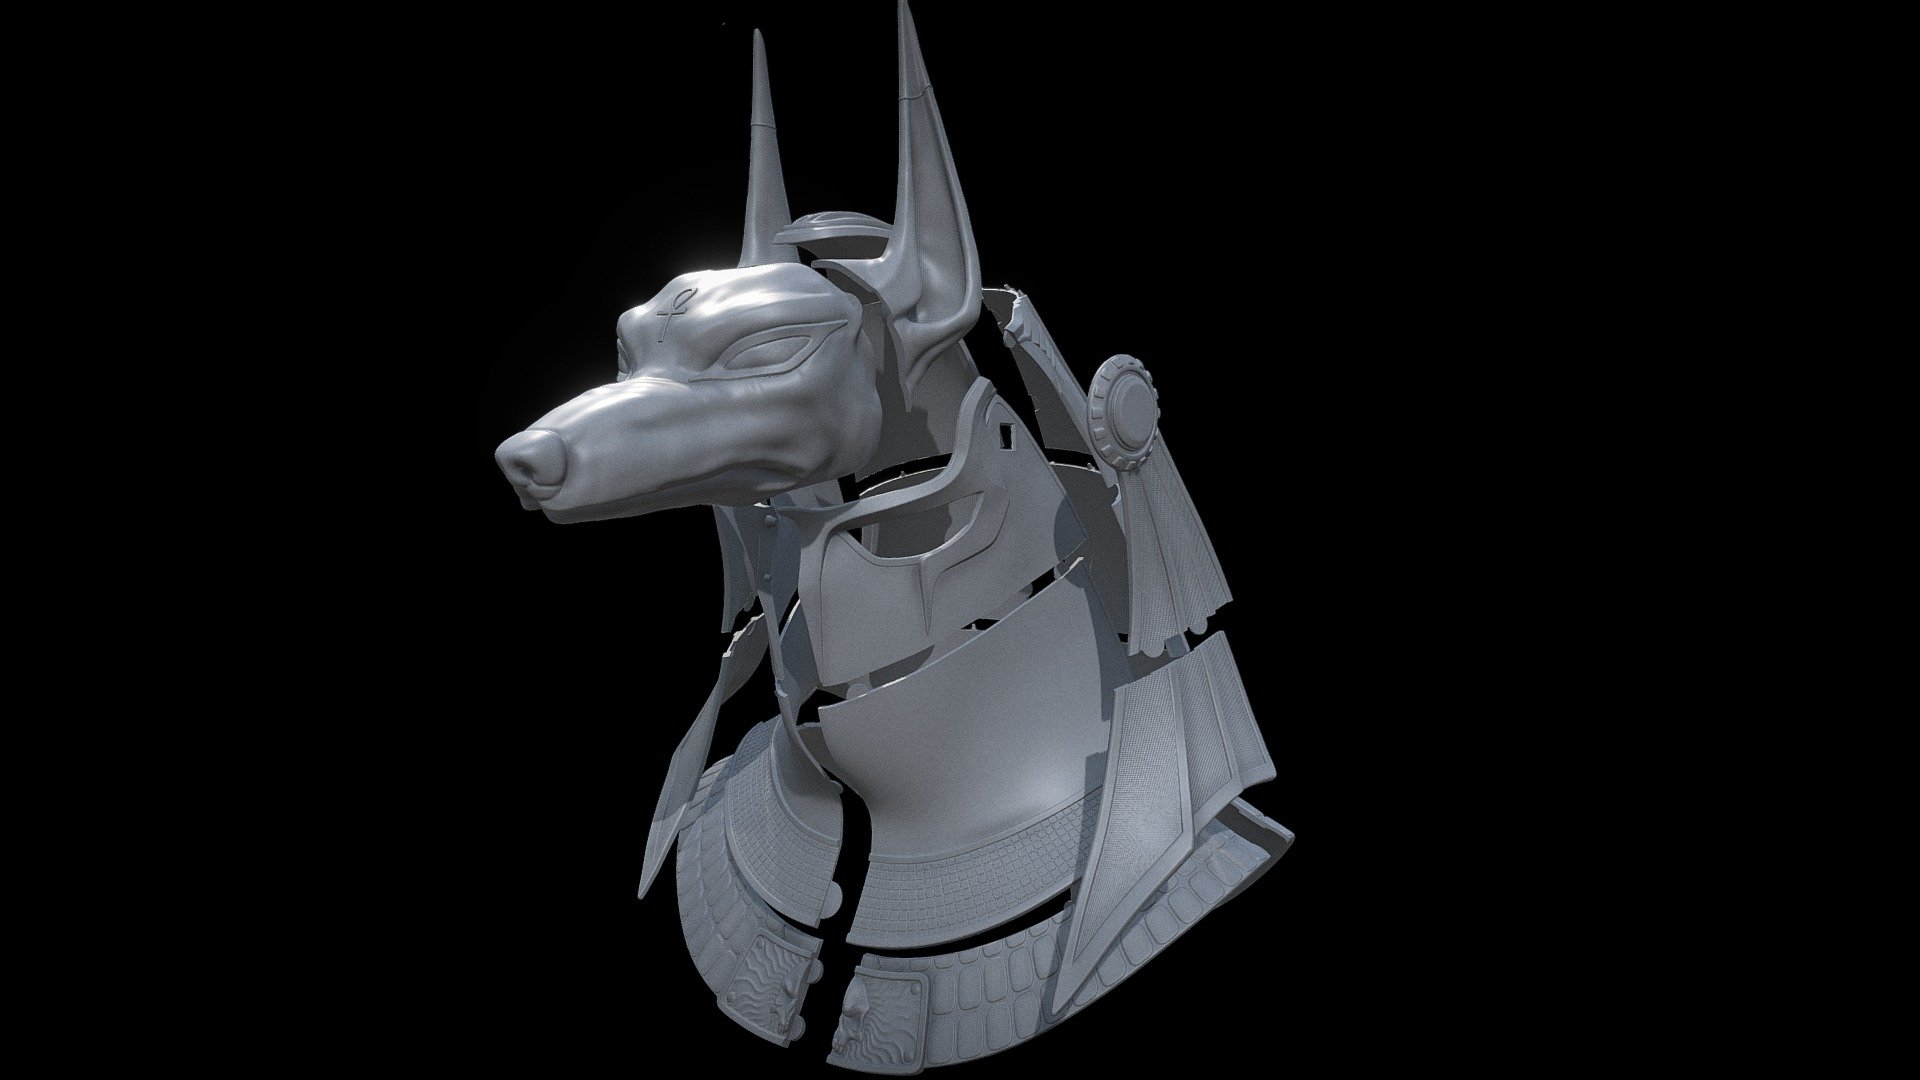 Here are few cuts I have done for this helmet.

Human average size. STL files attached. 

Let me know if you have any requests.

Enjoy! - Anubis helmet II Cuts - Buy Royalty Free 3D model by Omassyx 3d model